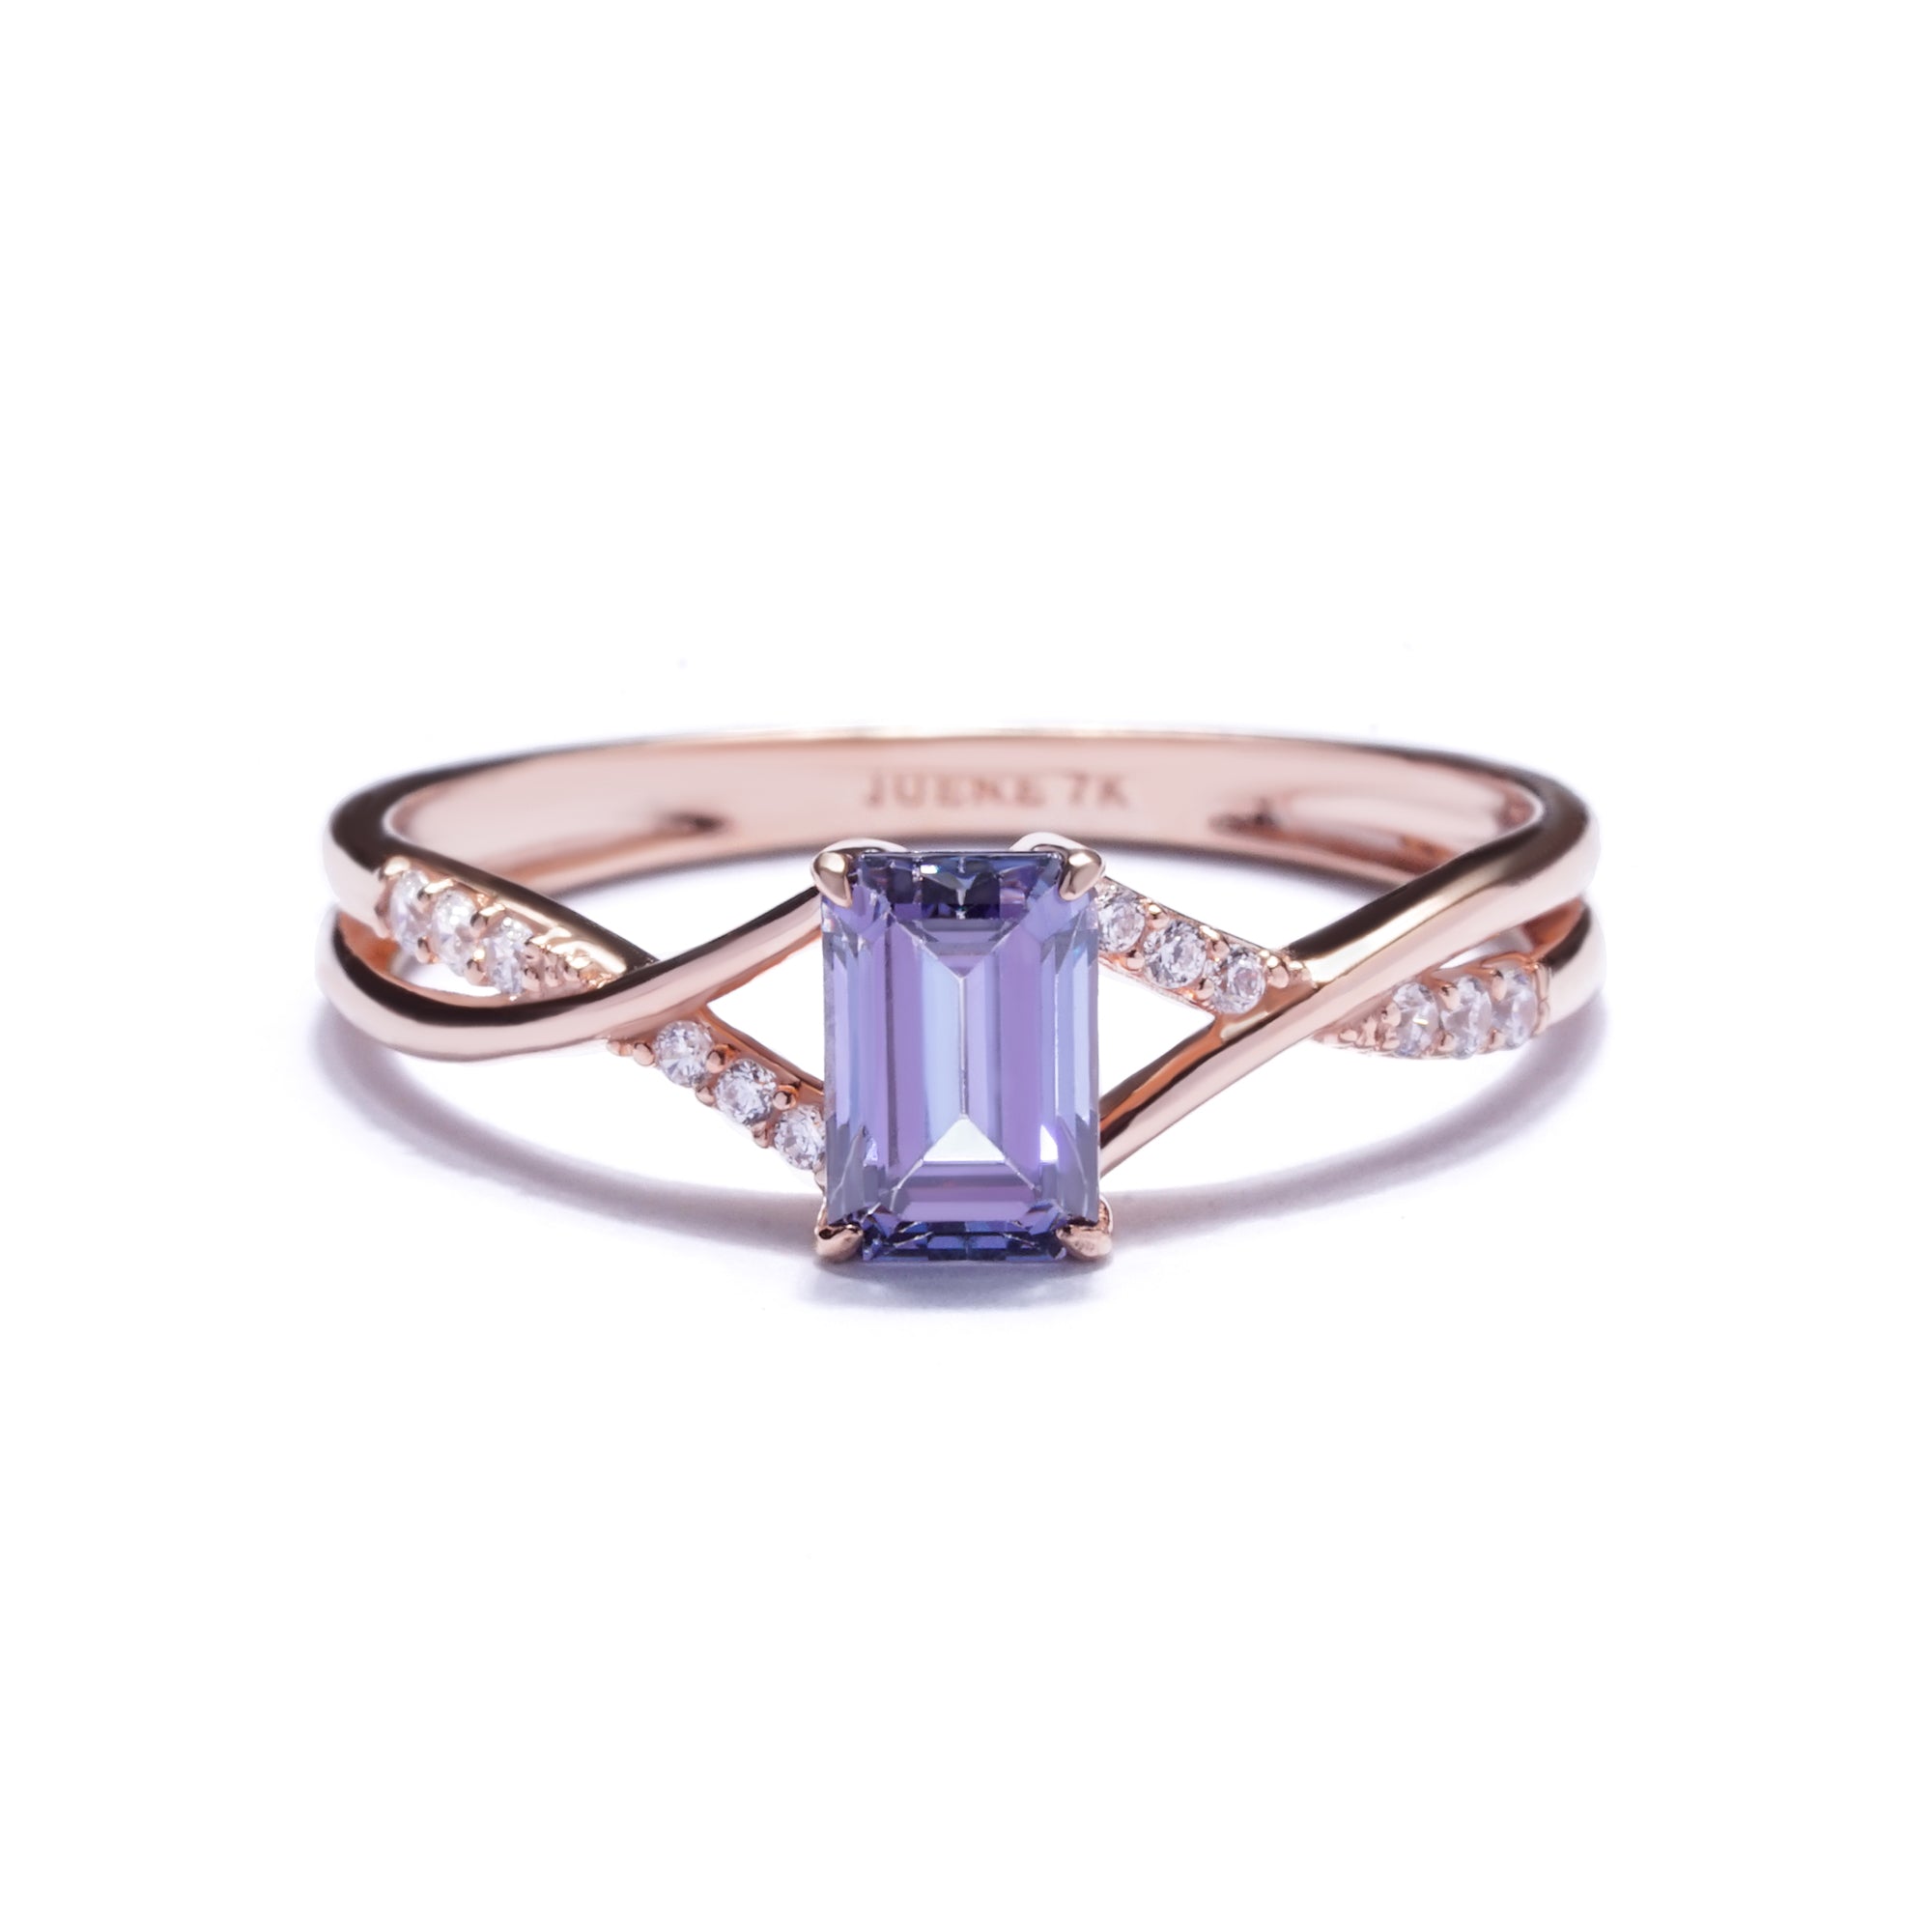 Zela Gold Ring - Twilight Collection - Juene Jewelry